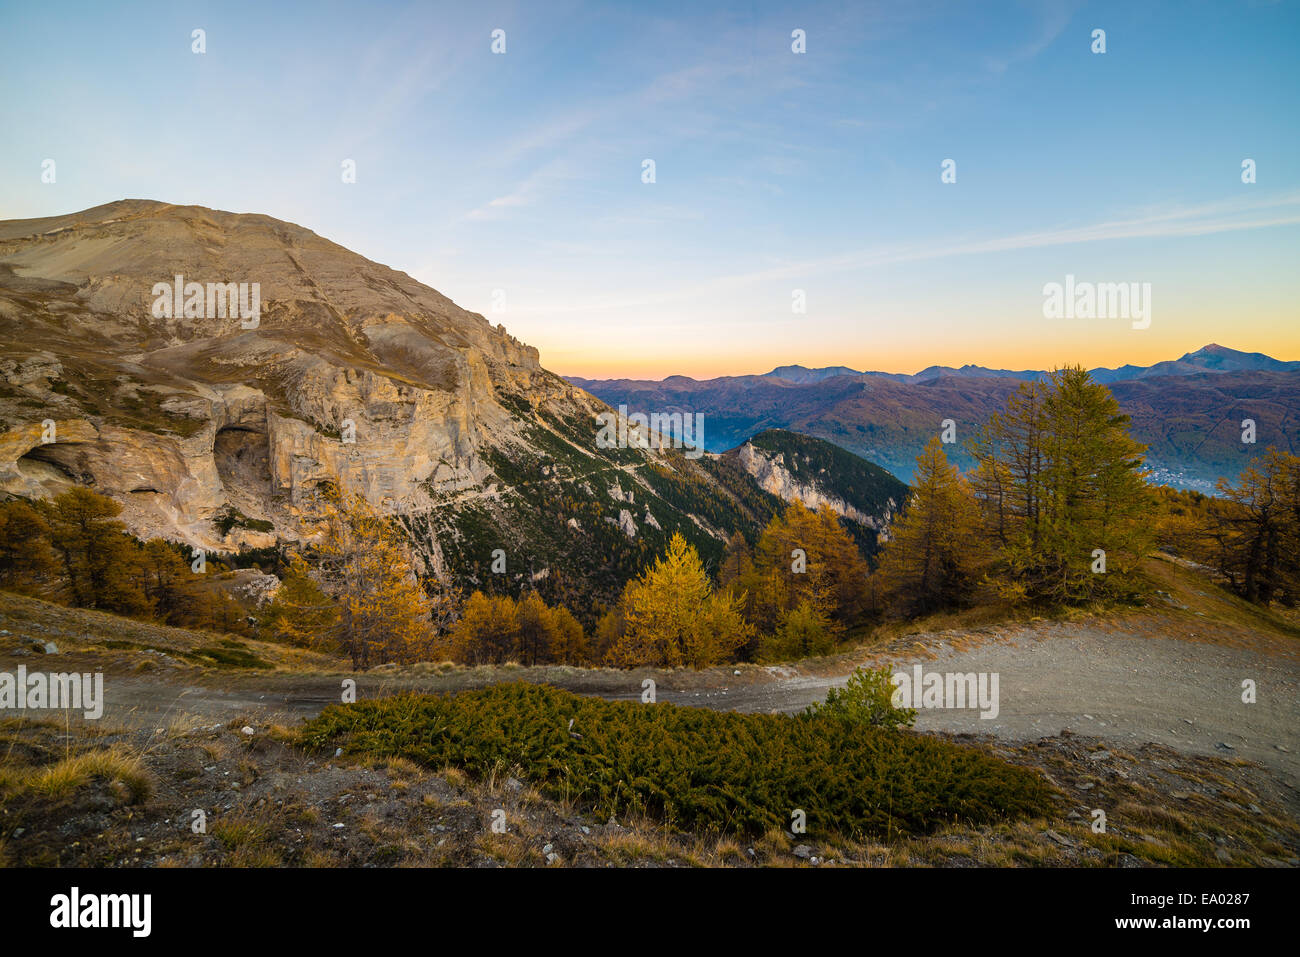 High altitude alpine landscape at dusk with panoramic view of misty ...